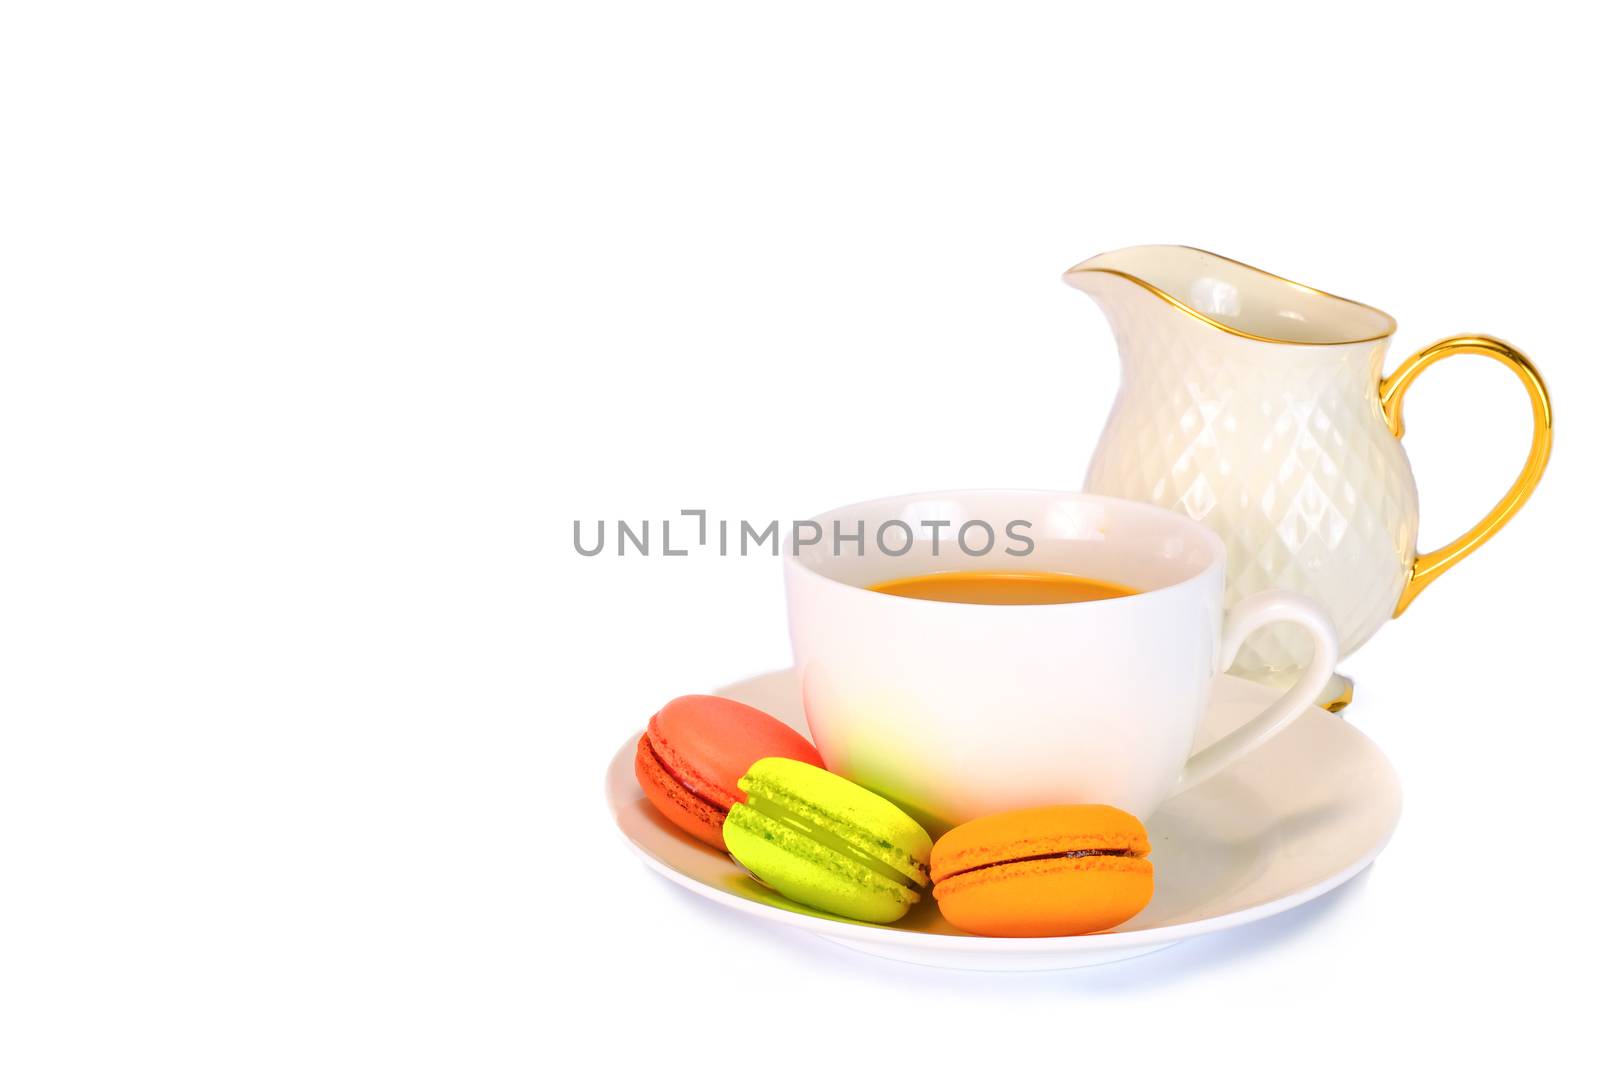 a white tea cup, a plate, and a milk jug with three colorful macaroons, an elegant aftertoon milk tea set, isolated on white background